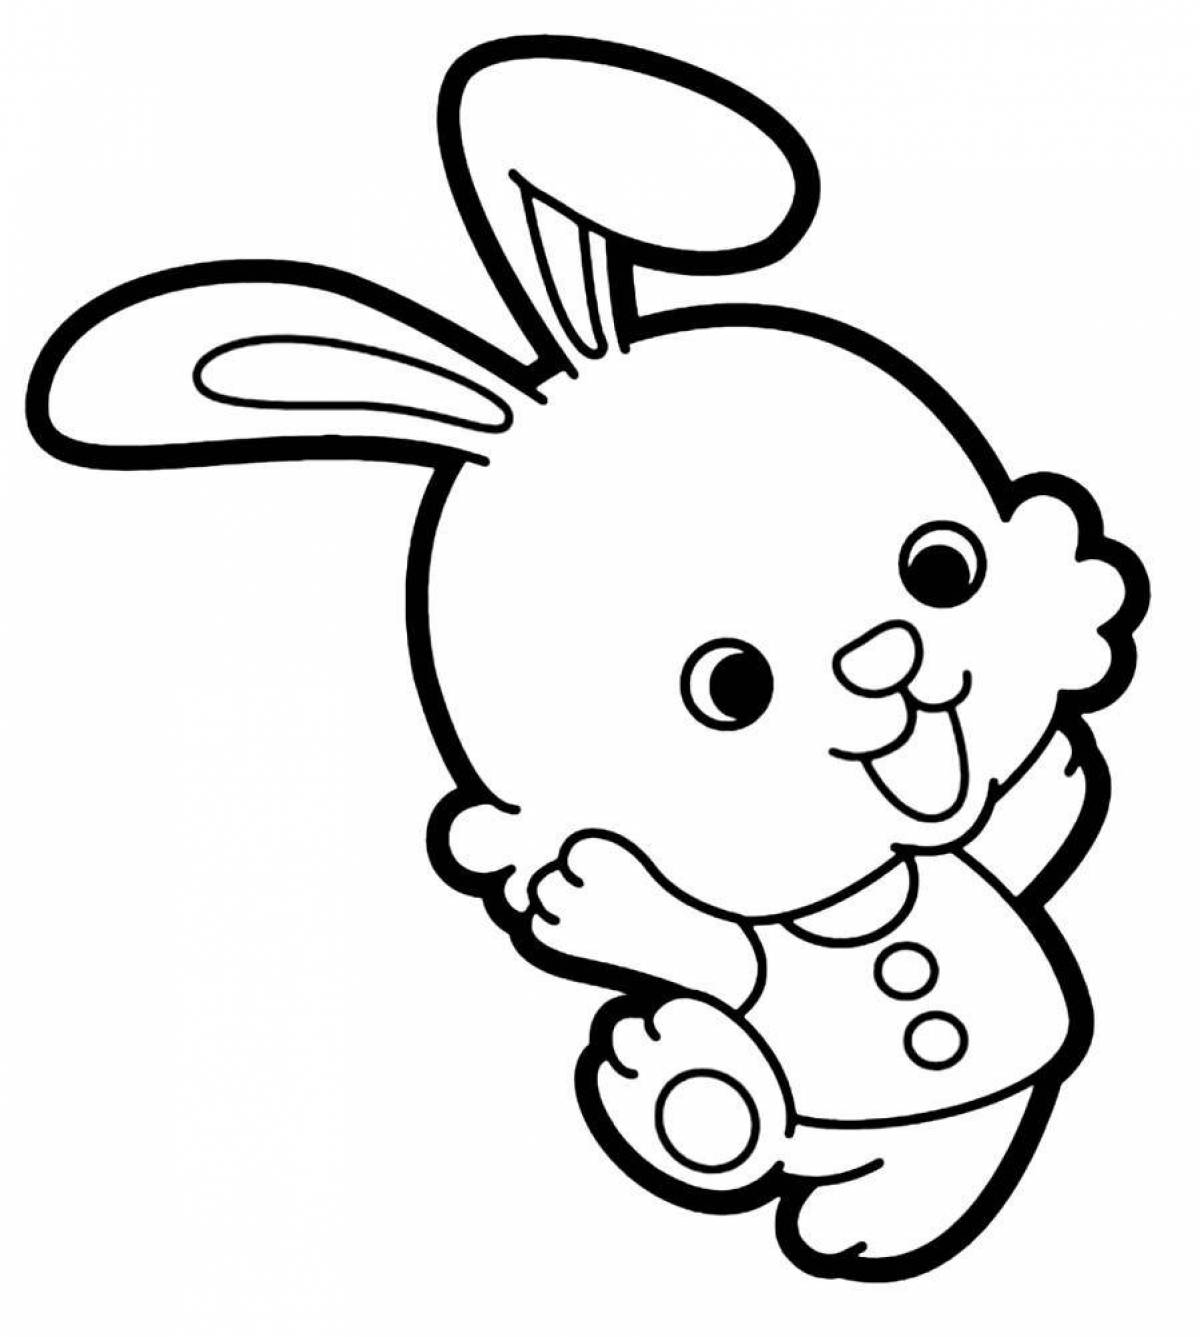 Winking bunny coloring book for kids